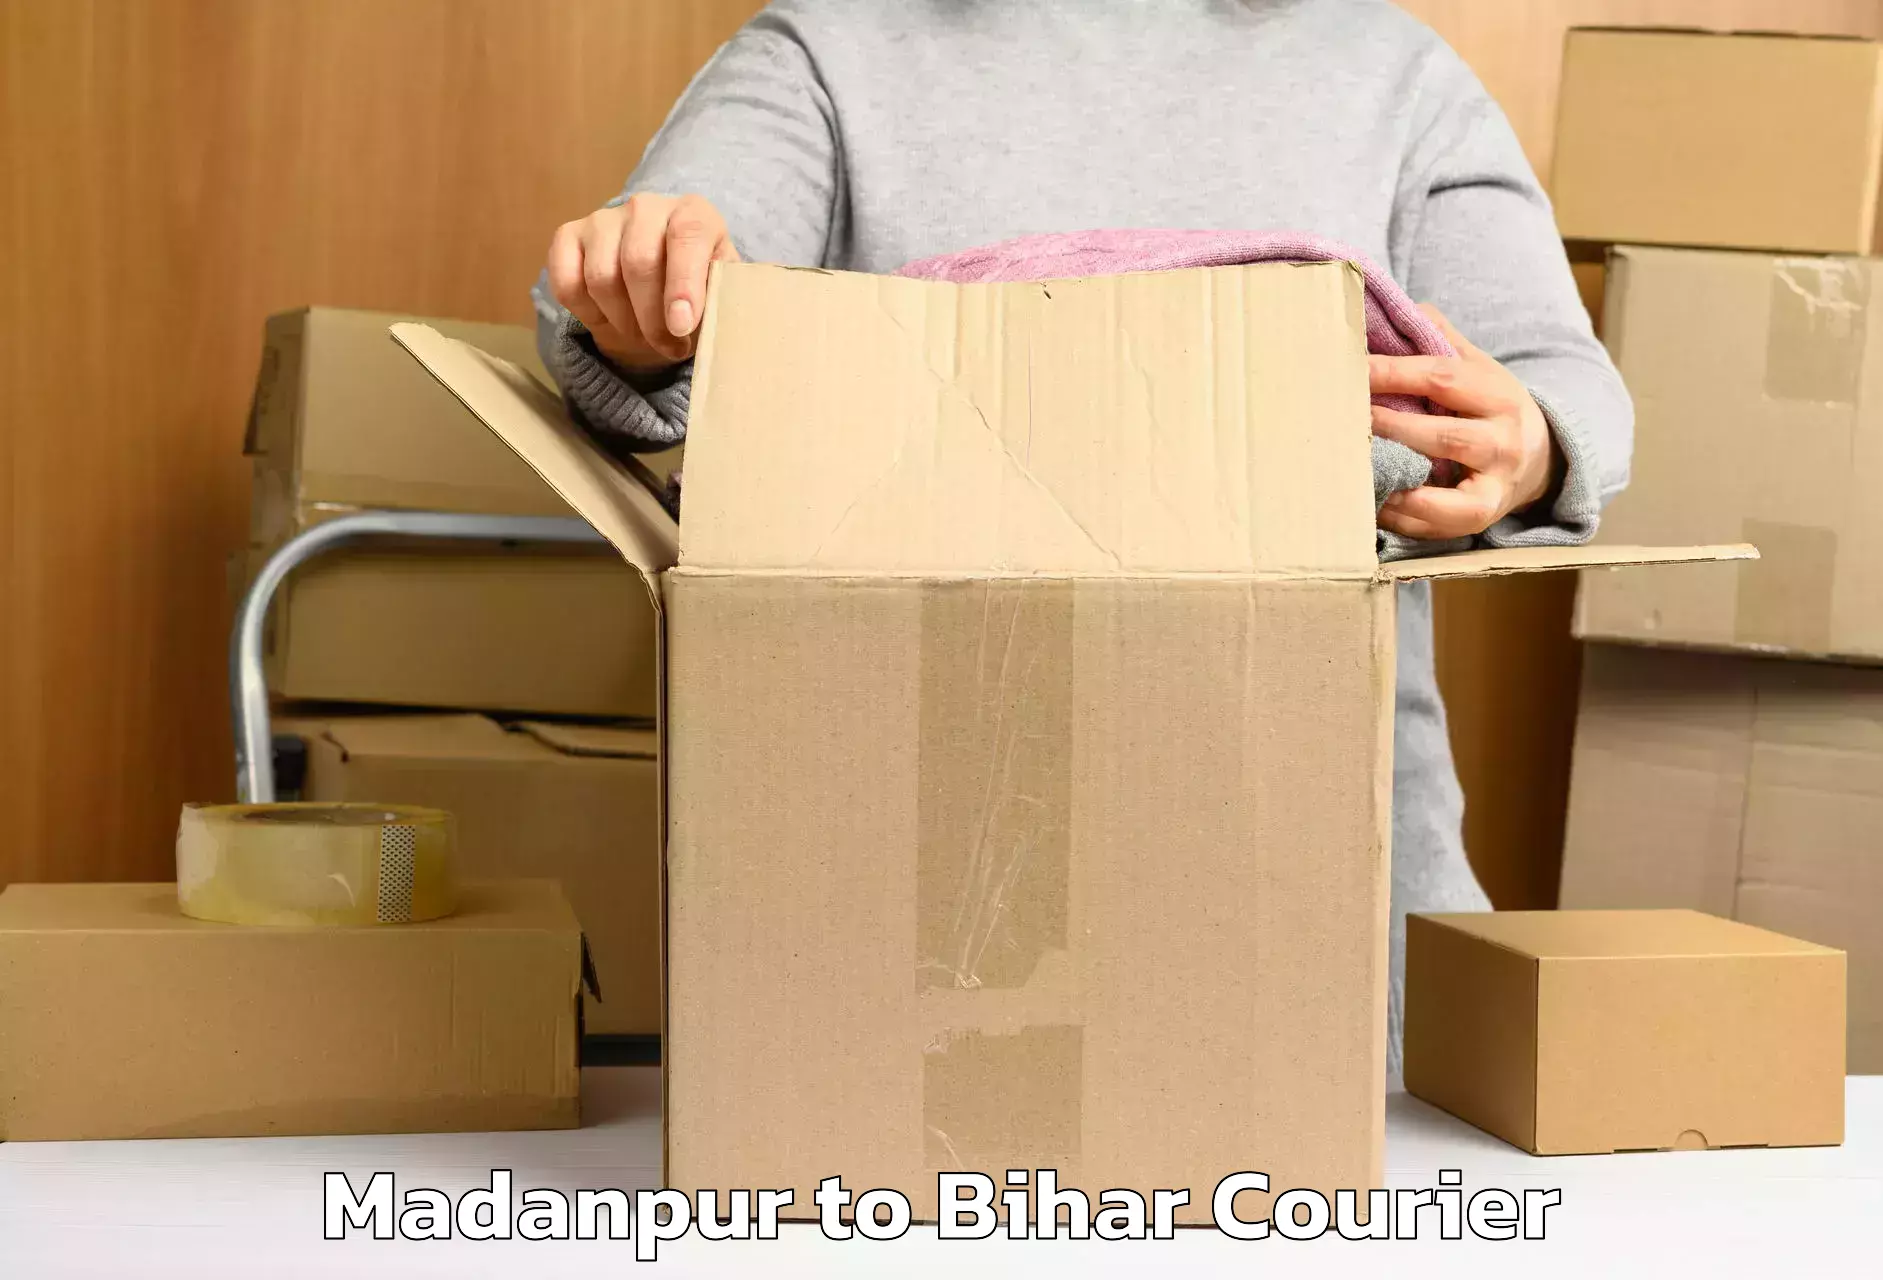 Luggage delivery estimate in Madanpur to Aurangabad Bihar